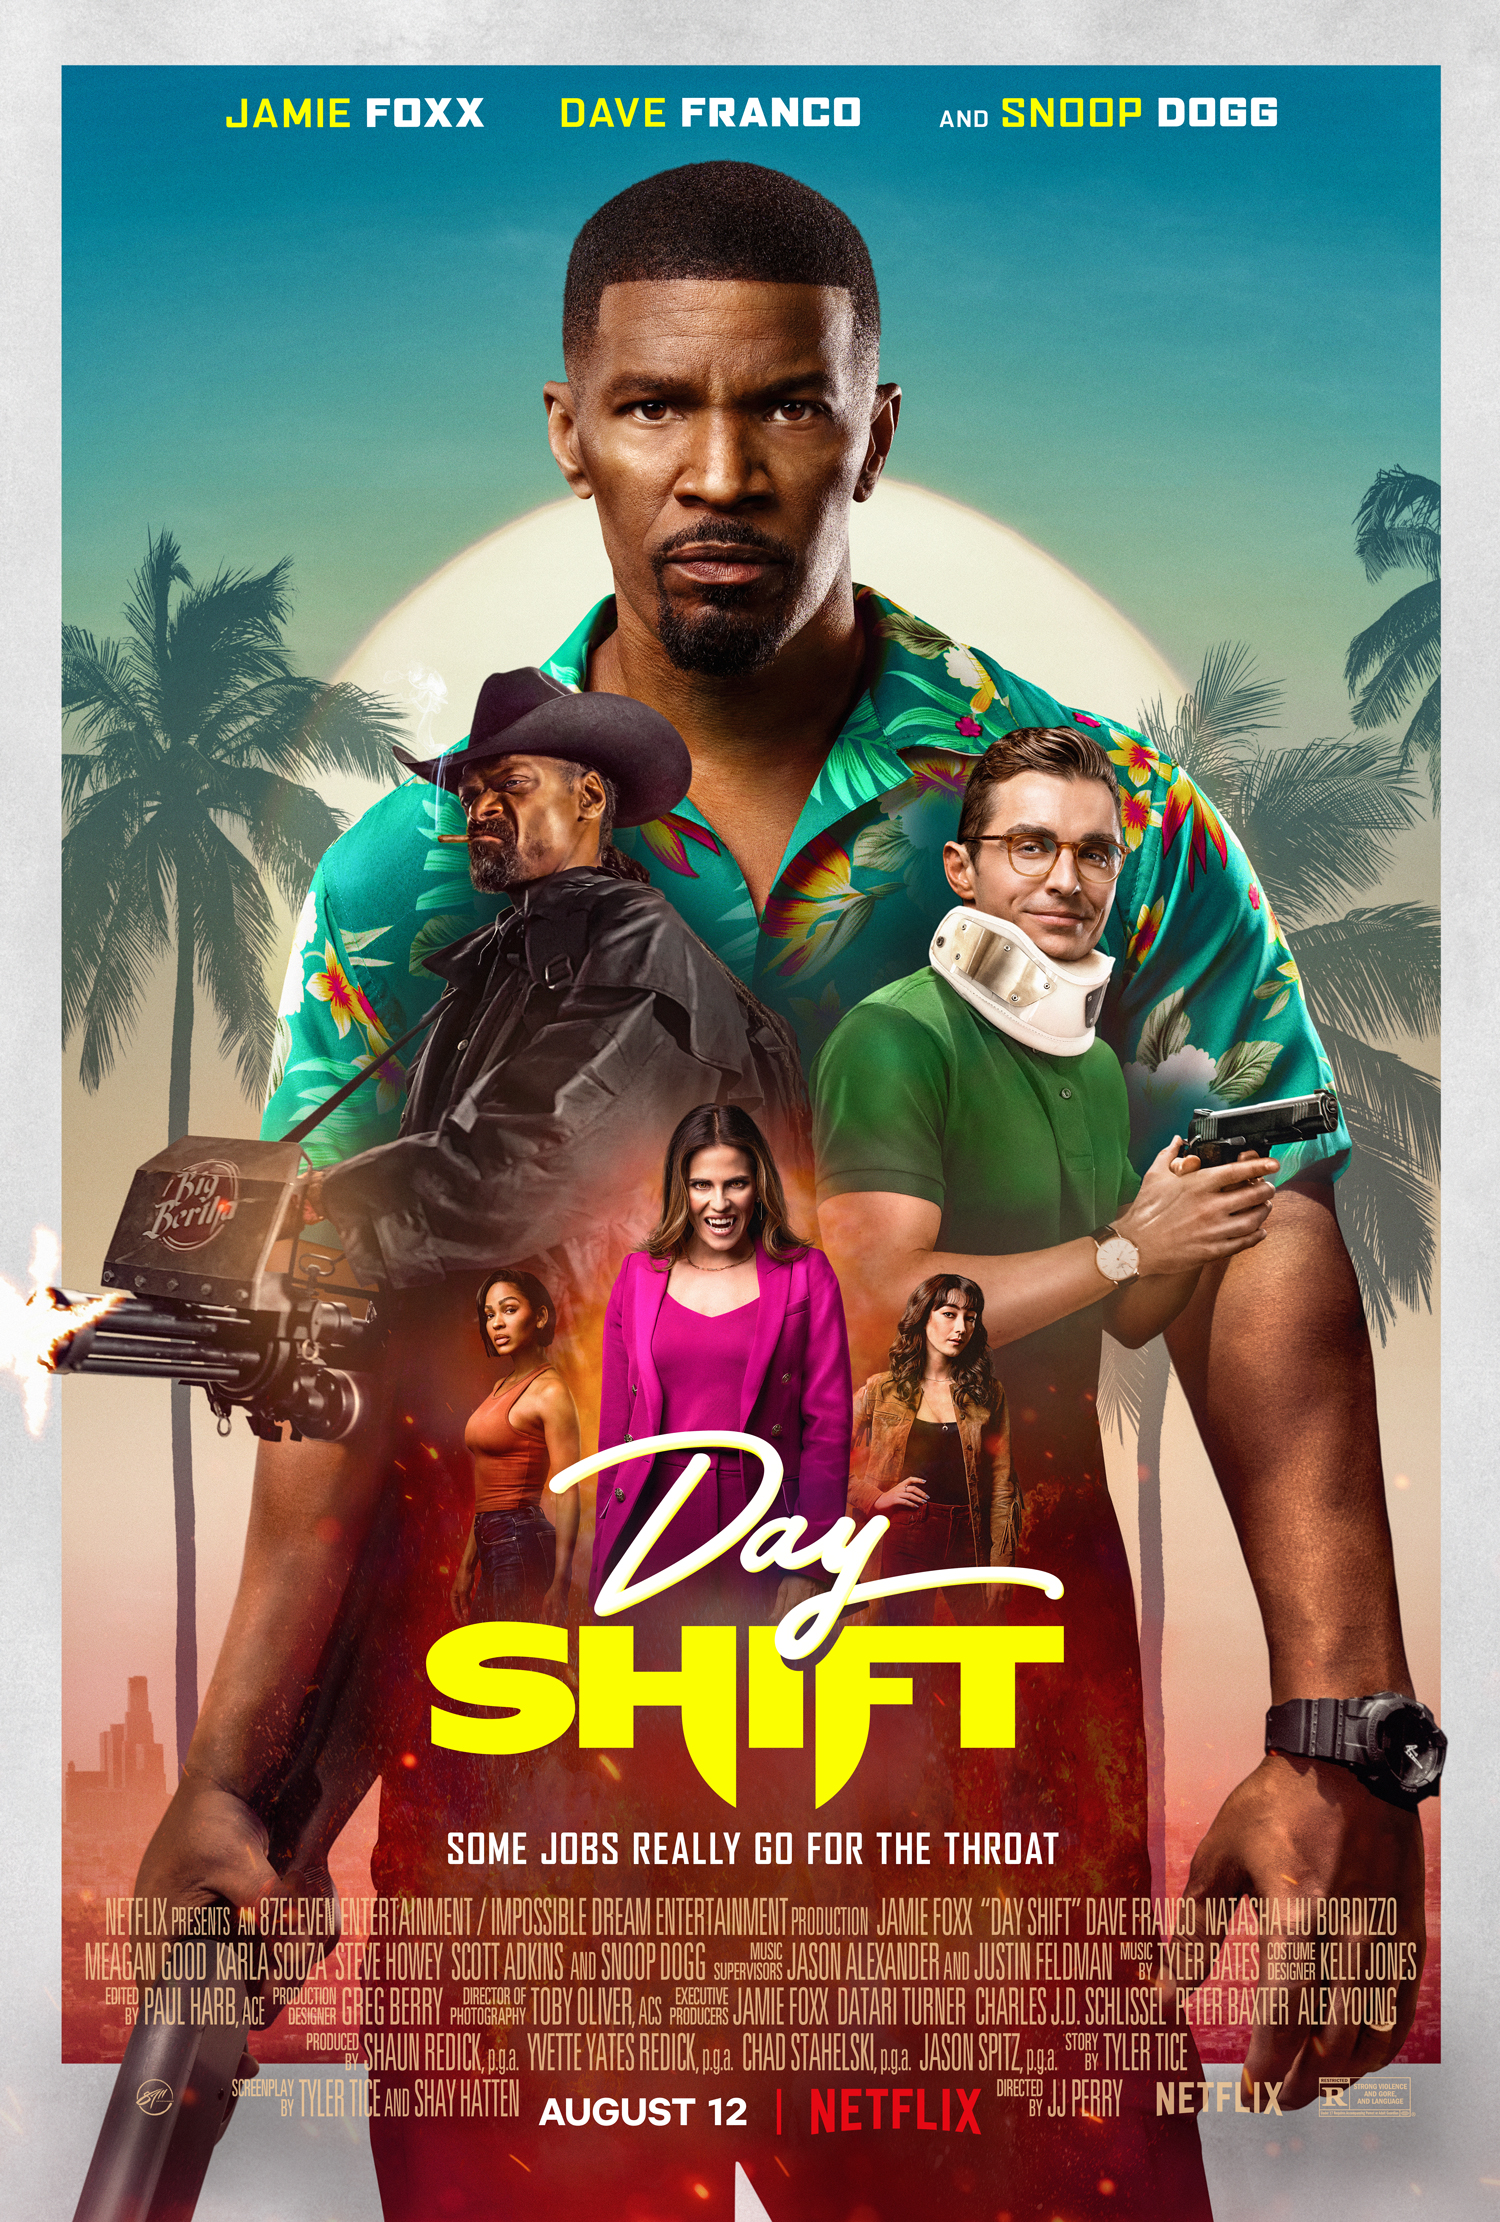 New Movie: ‘Day Shift’ Starring Jamie Foxx, Dave Franco And Snoop Dogg